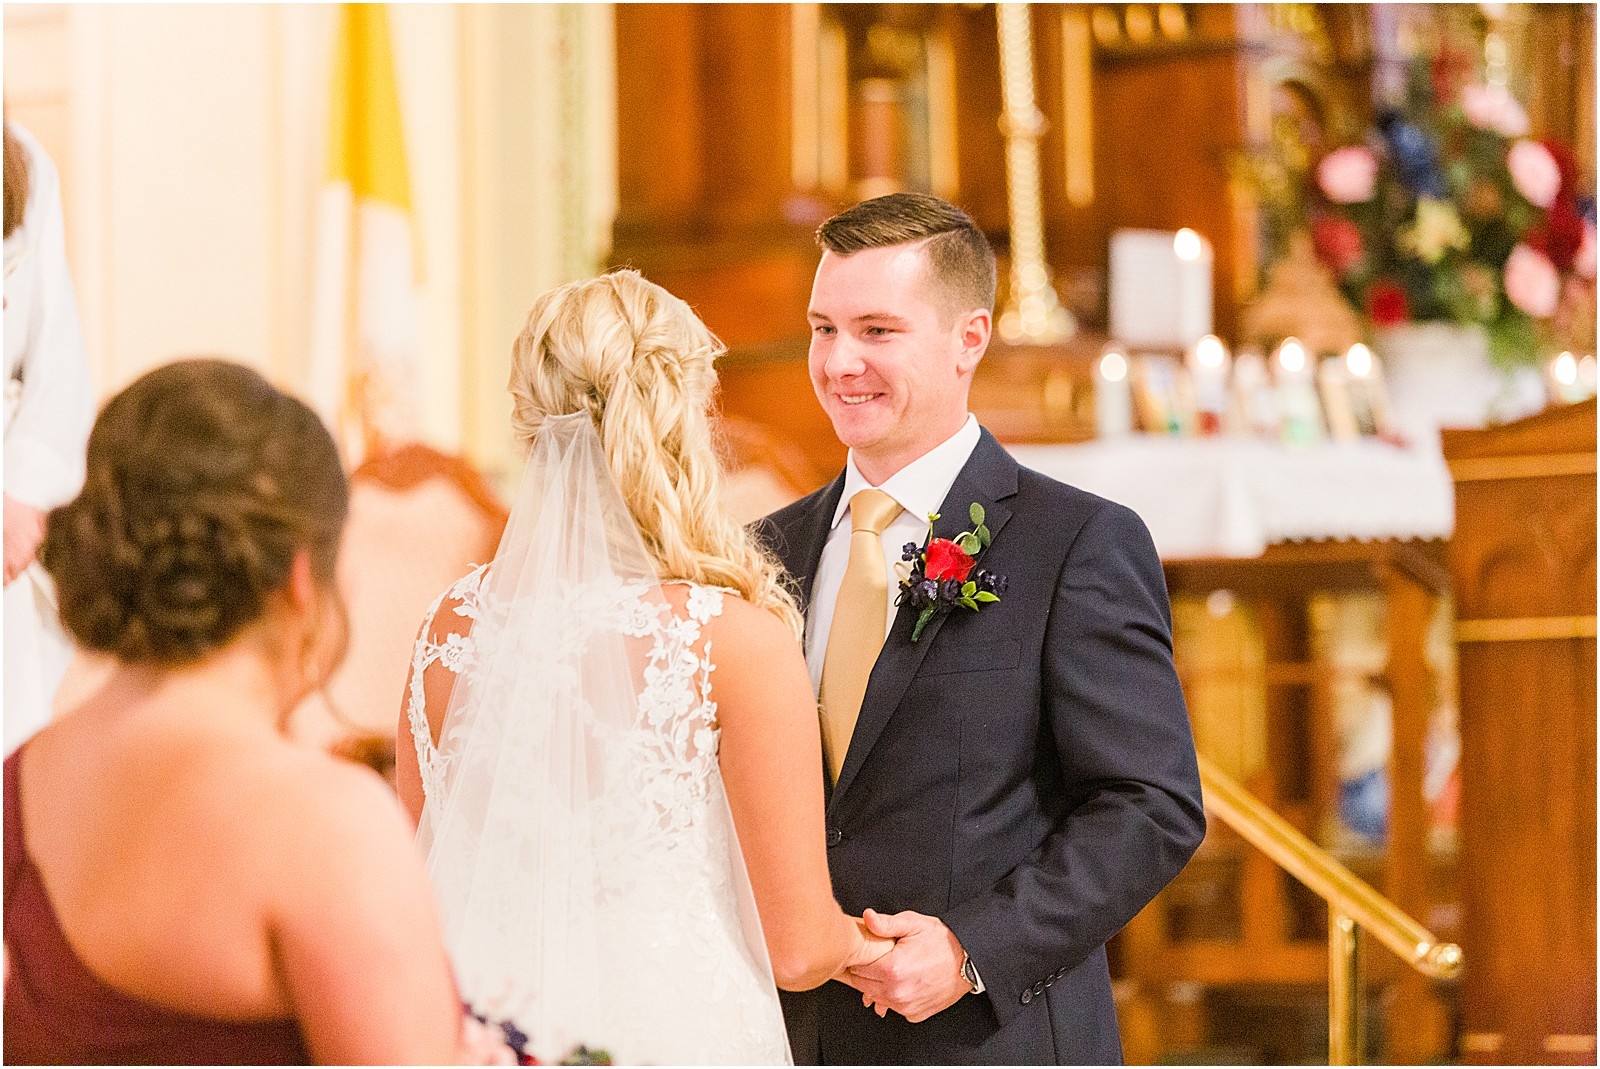 Haylee and Dillon's Evansville, Indiana wedding by Bret and Brandie Photography.0056.jpg